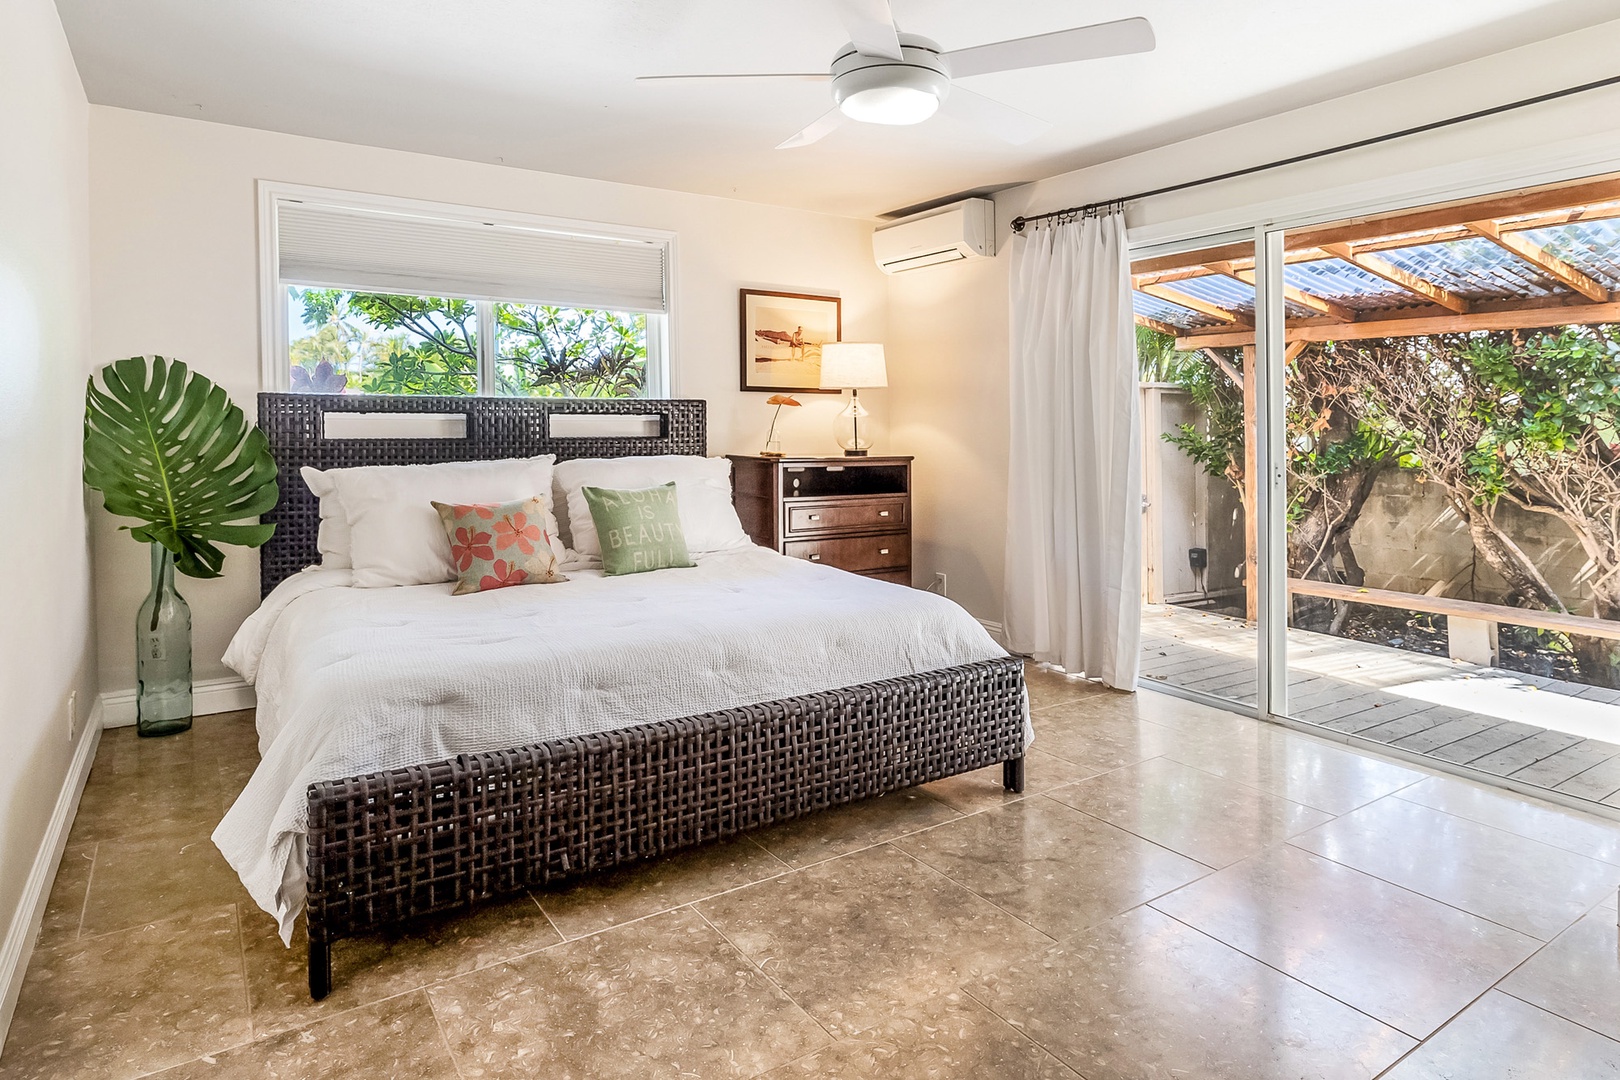 Honolulu Vacation Rentals, Hale Ho'omaha - Direct access to the exterior and equipped with split AC and a ceiling fan for your comfort